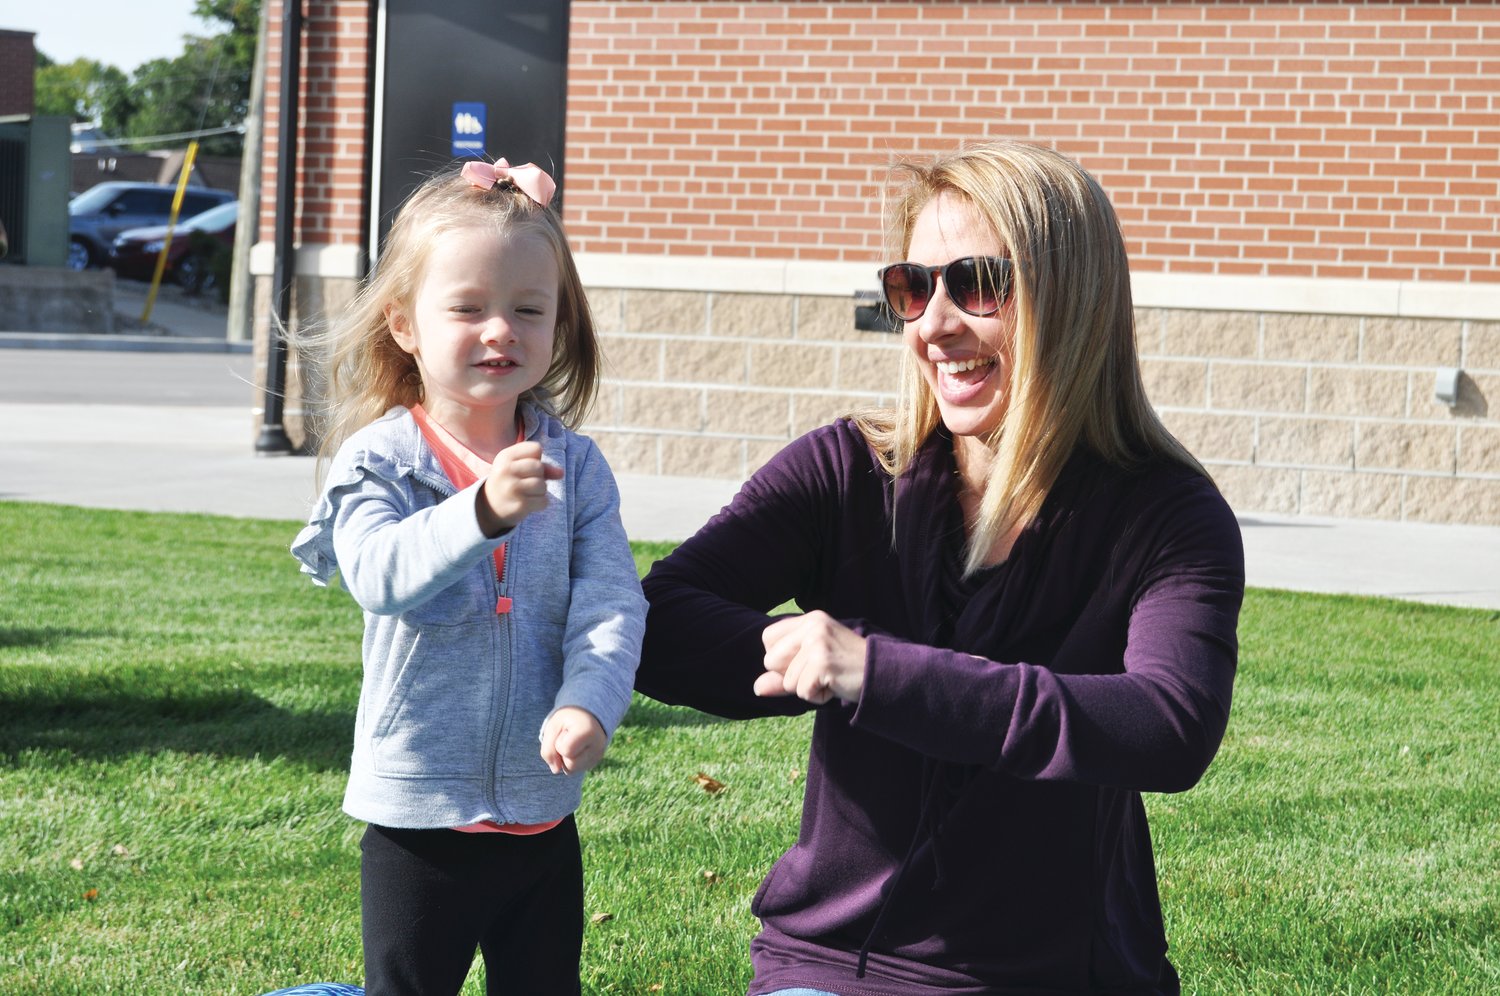 Ella Rauch, 2, and her mother Bethany do the motions to a song Friday during Crawfordsville District Public Library's Wiggle & Giggle program at Pike Place. The drop-in program is open to children ages 18 months to 4 years.